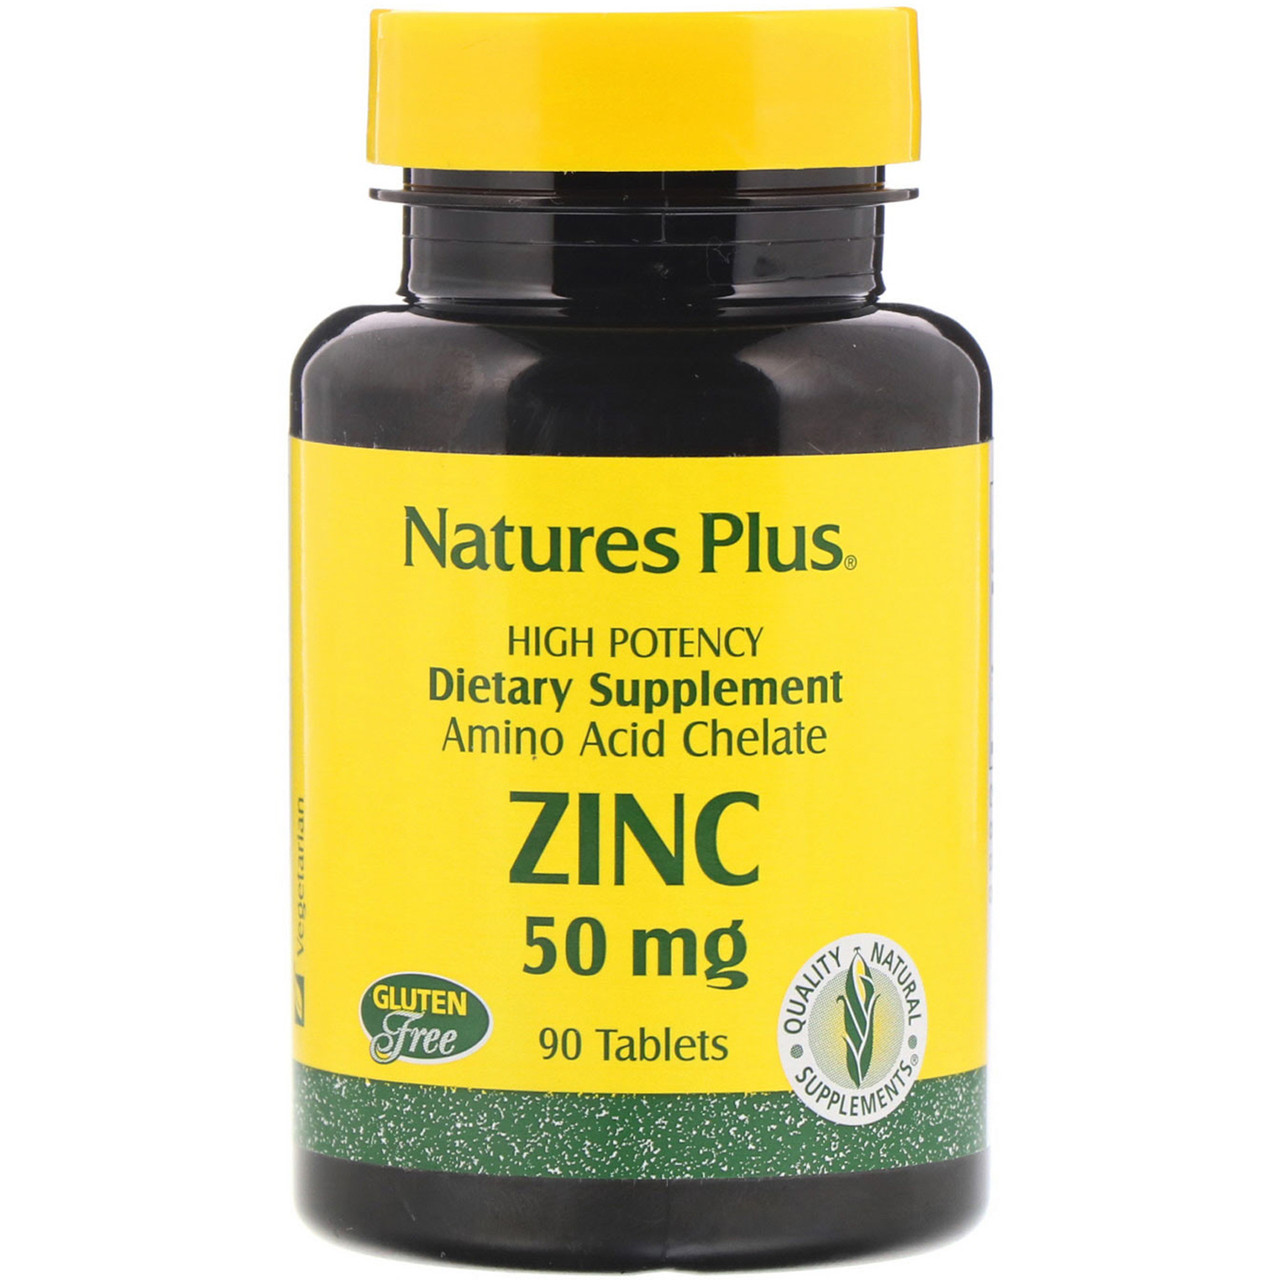 Where to buy zinc tablets